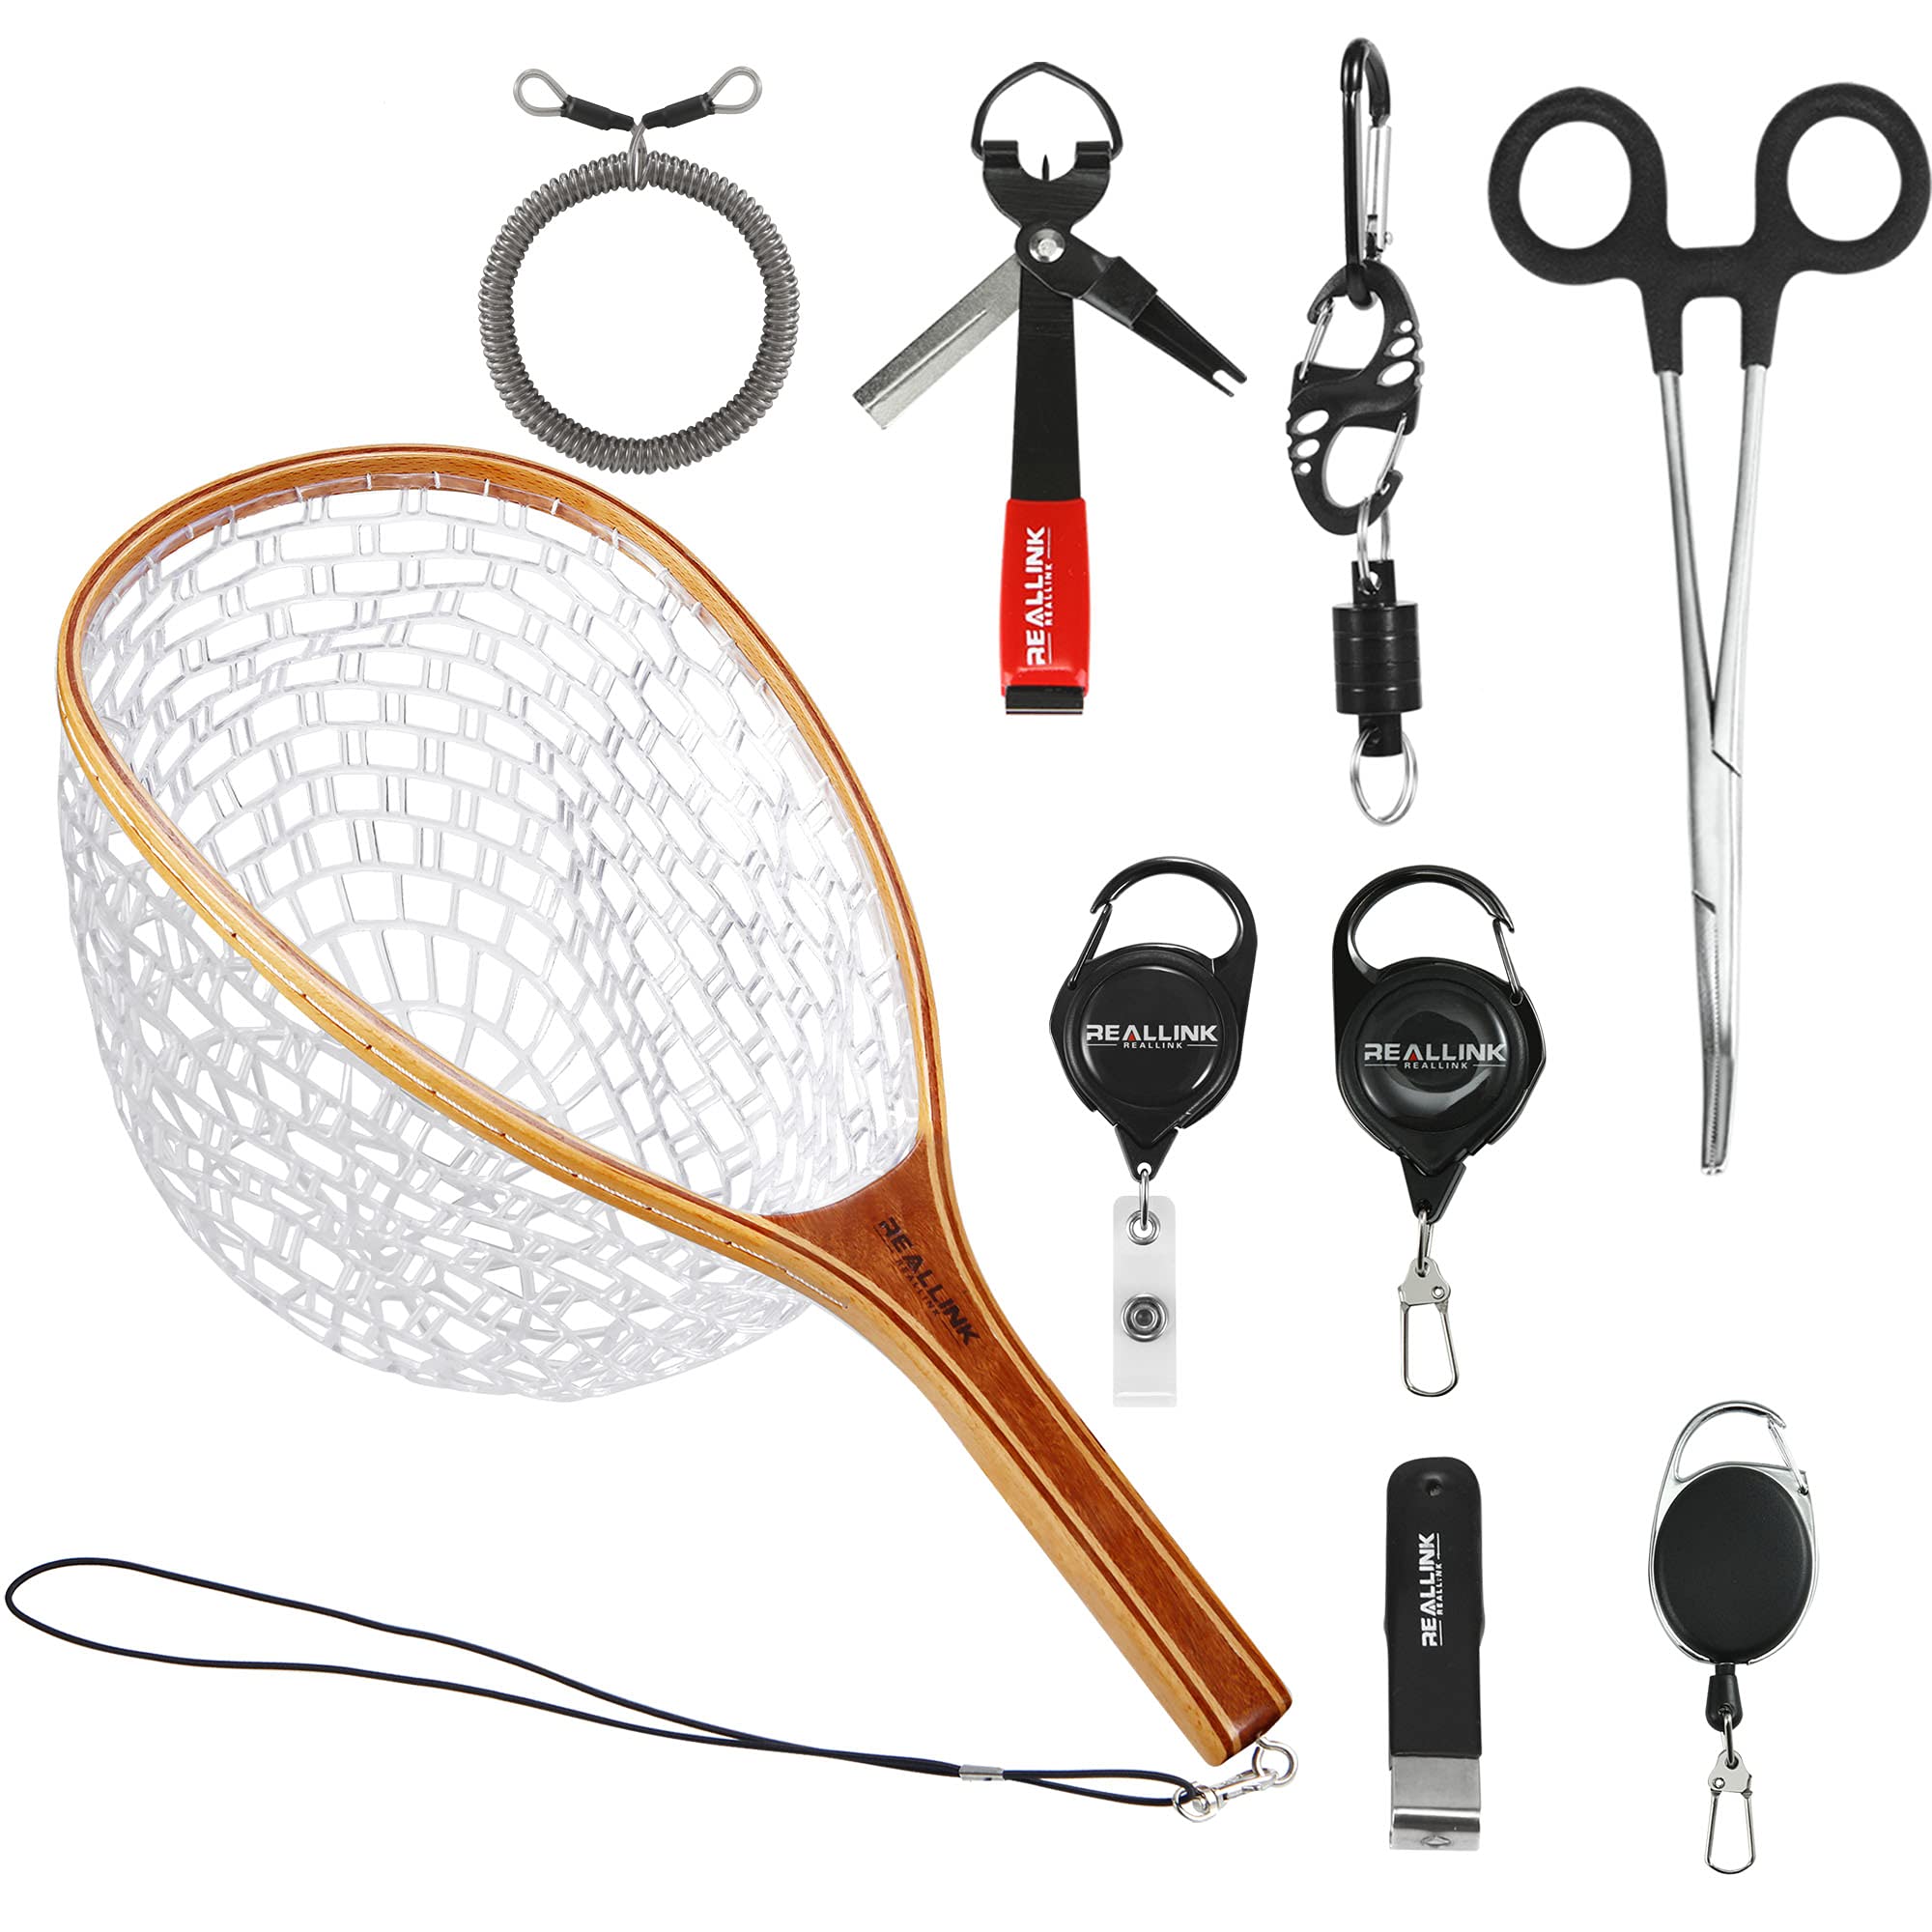 Fly Fishing Tools Kit and Accessories Combo Kits, Fishing Quick